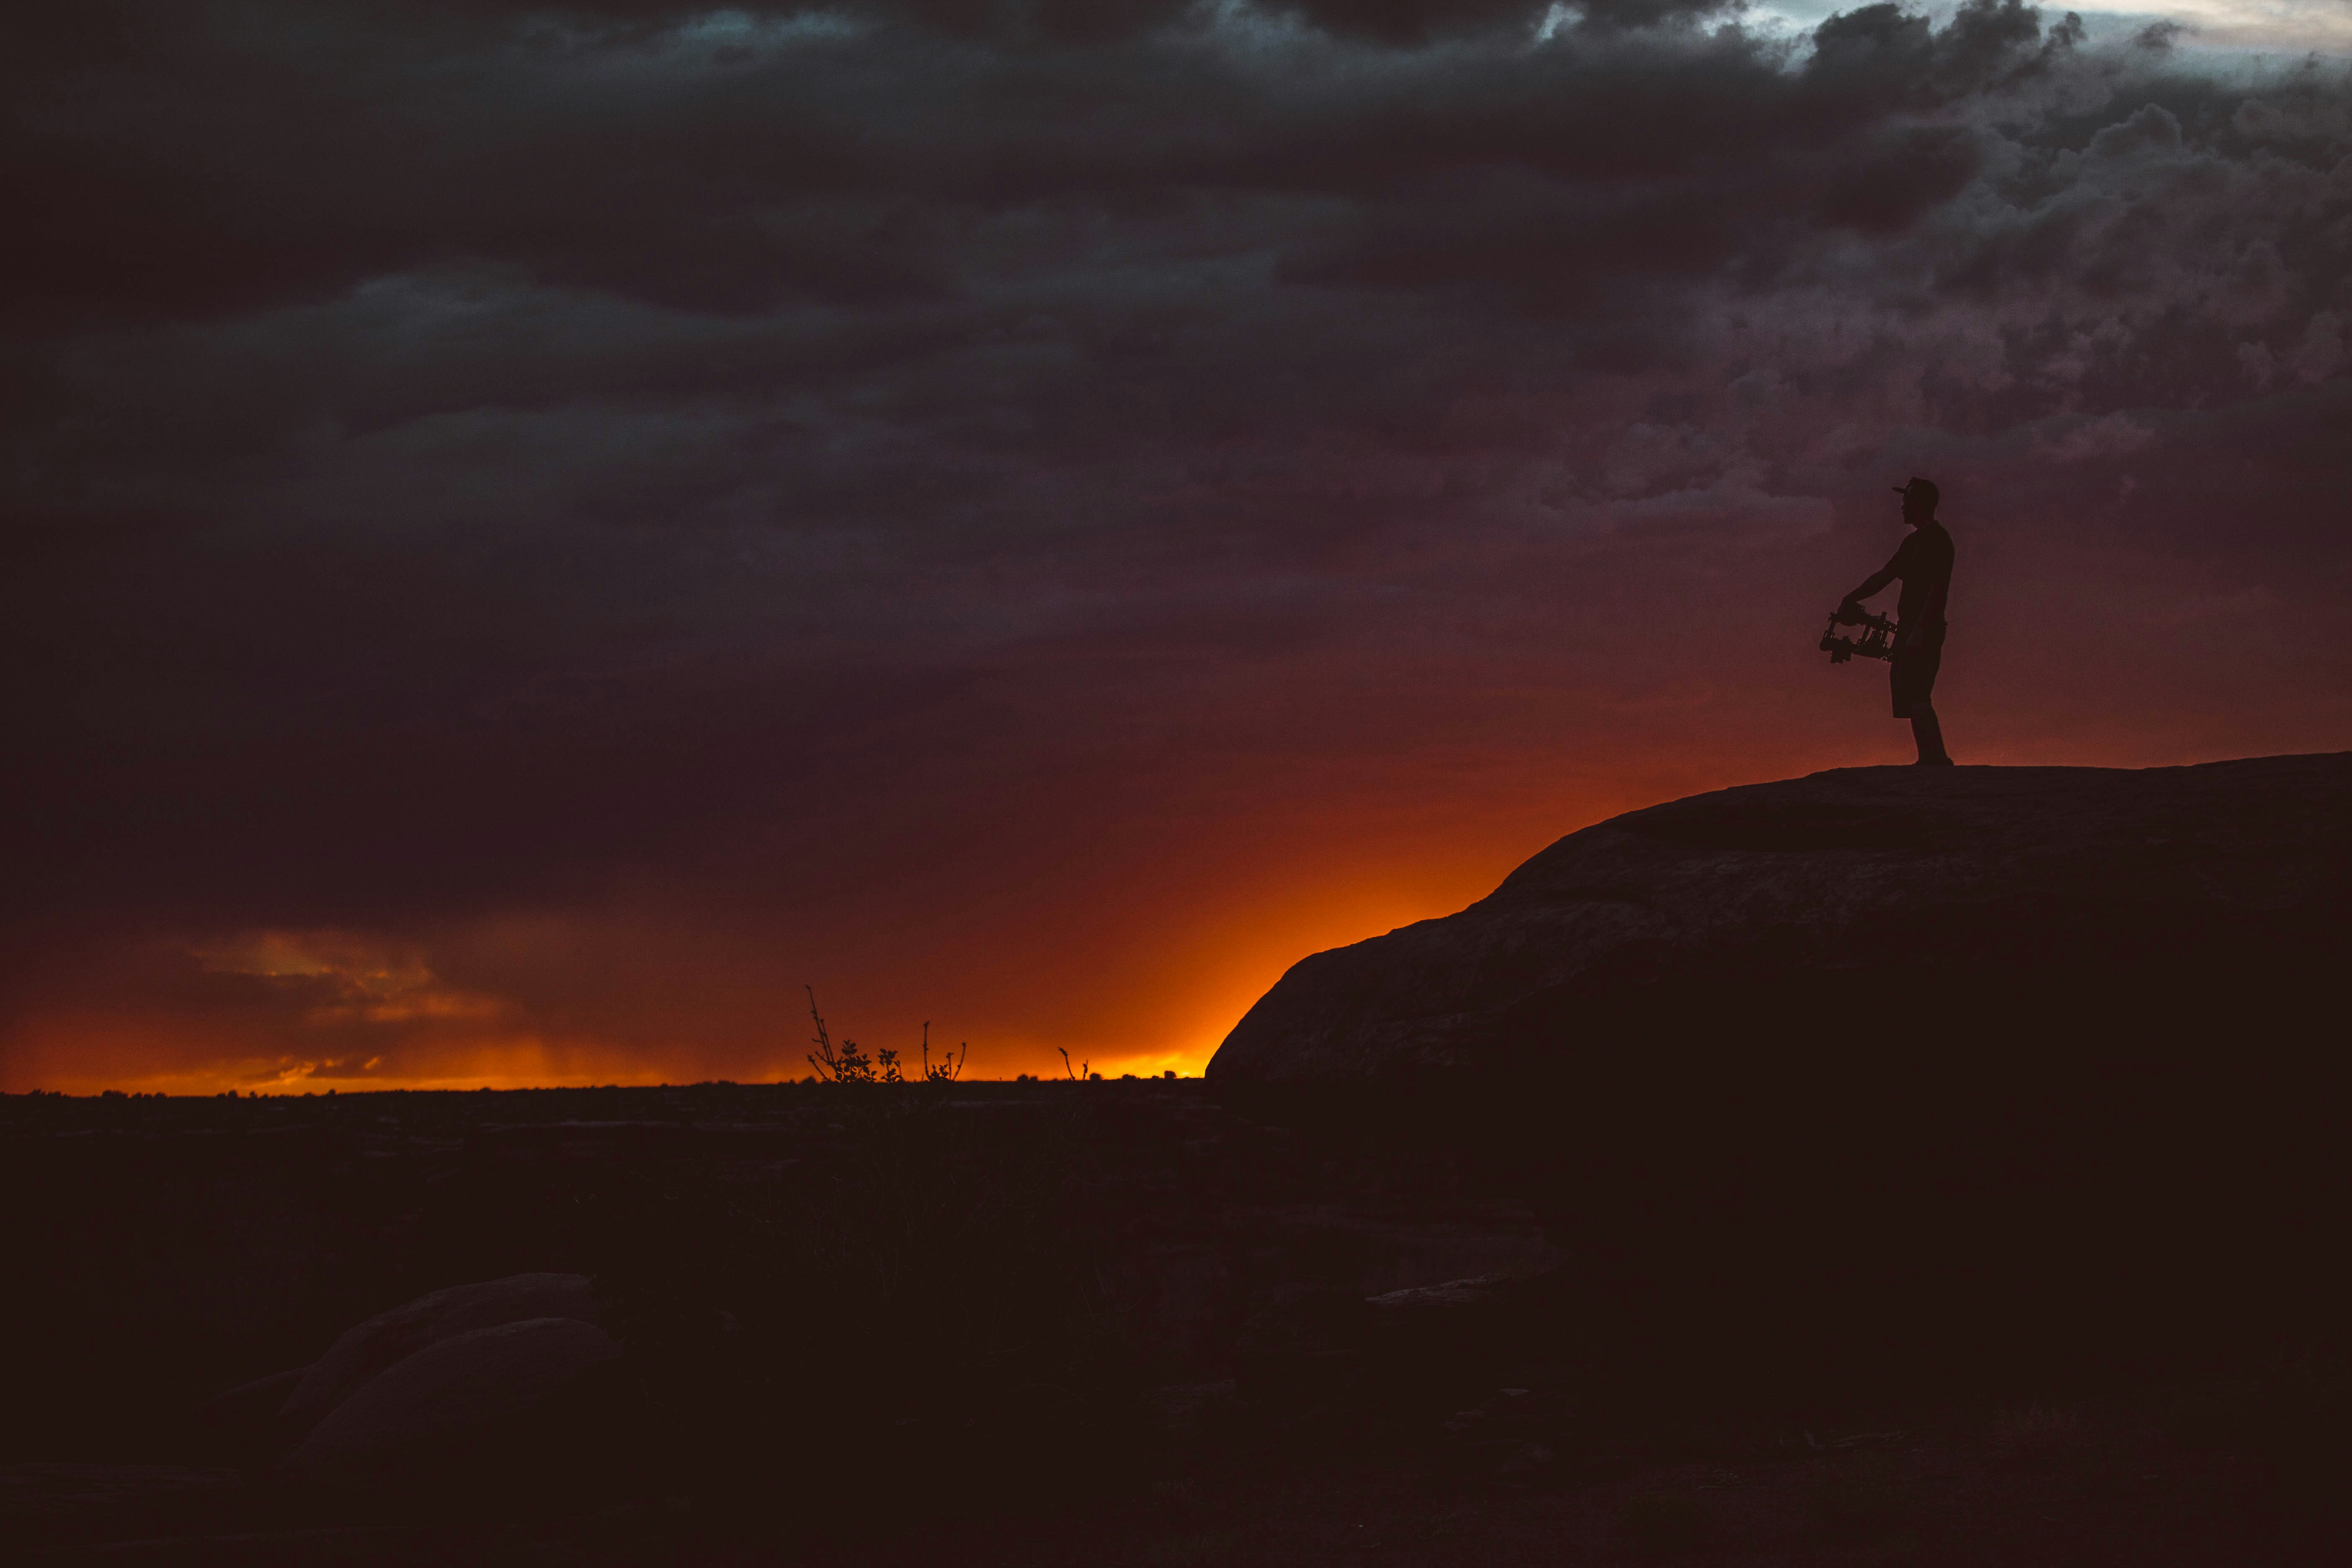 silhouette of person standing on rock during sunset